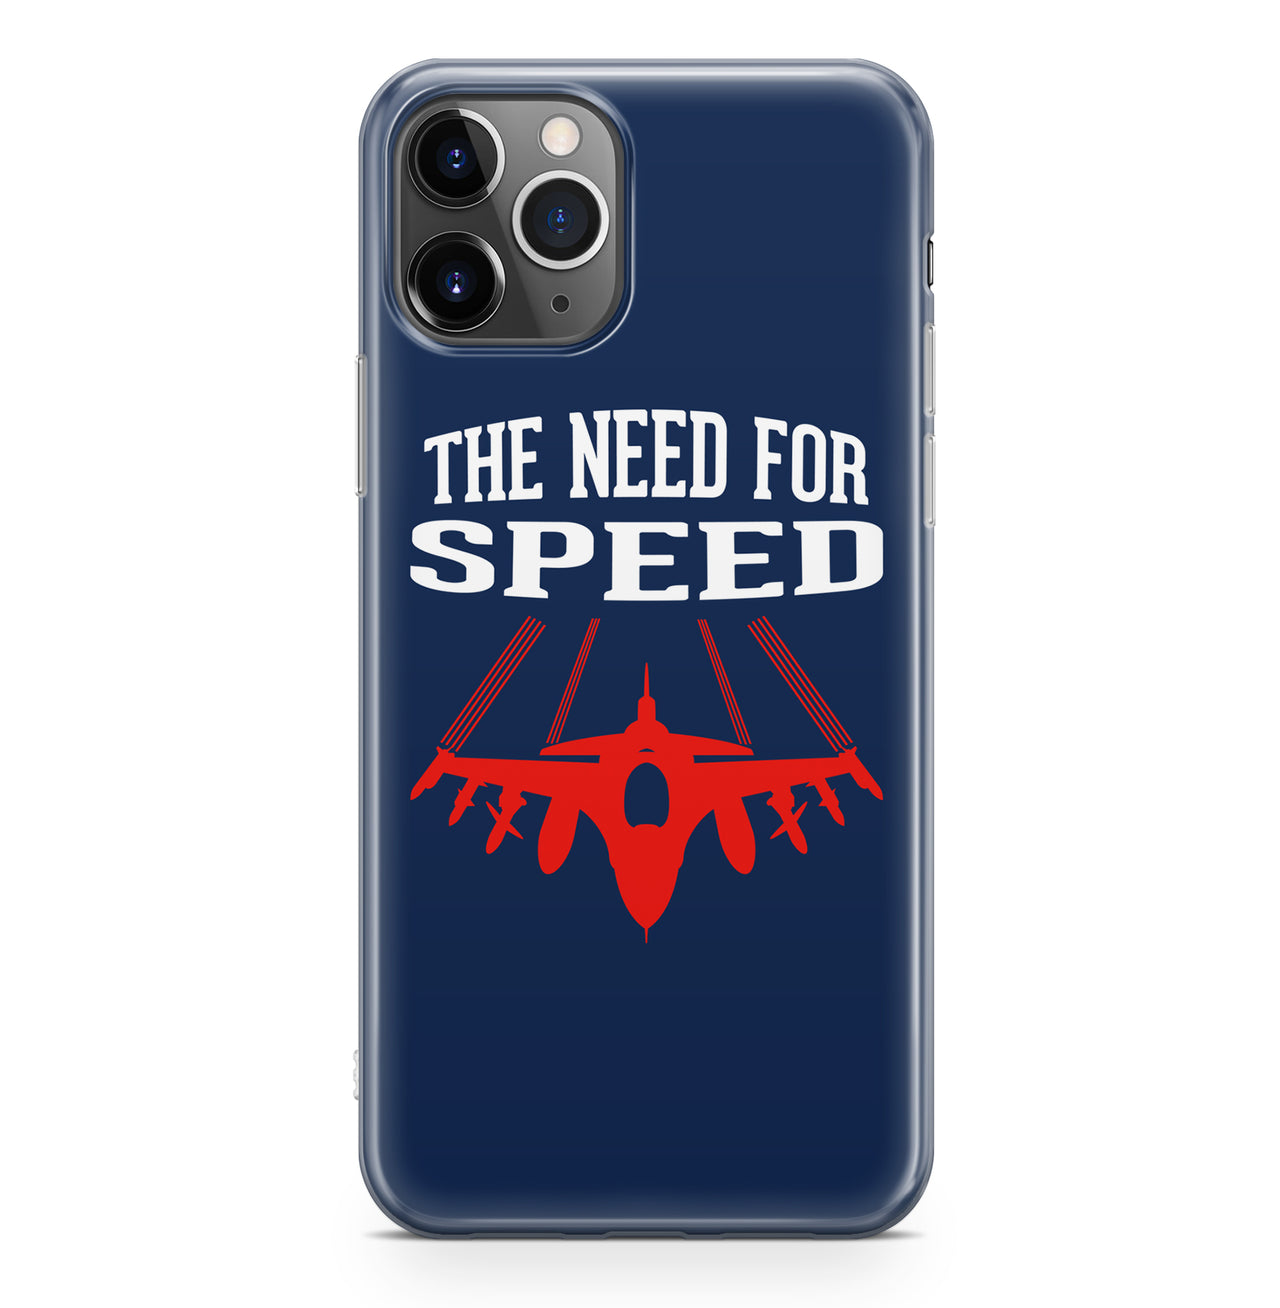 The Need For Speed Designed iPhone Cases